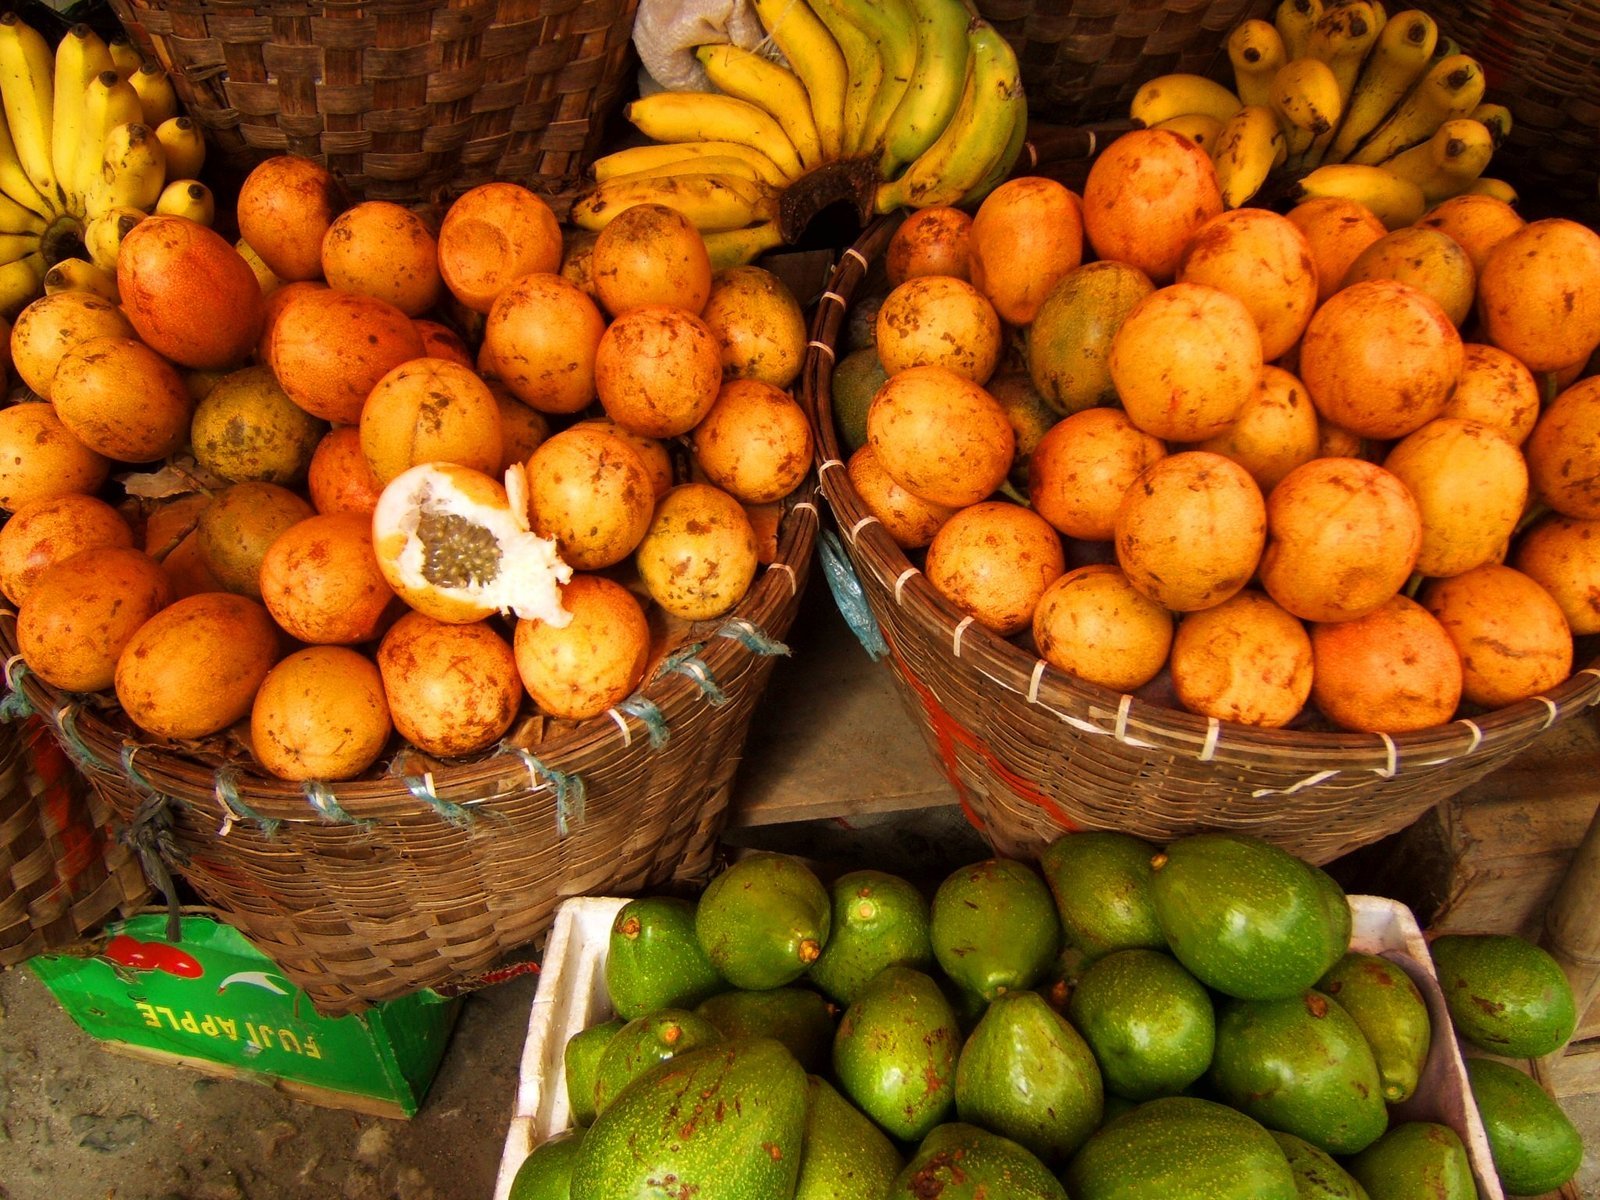 baskets filled with various types of fruit such as bananas and pears